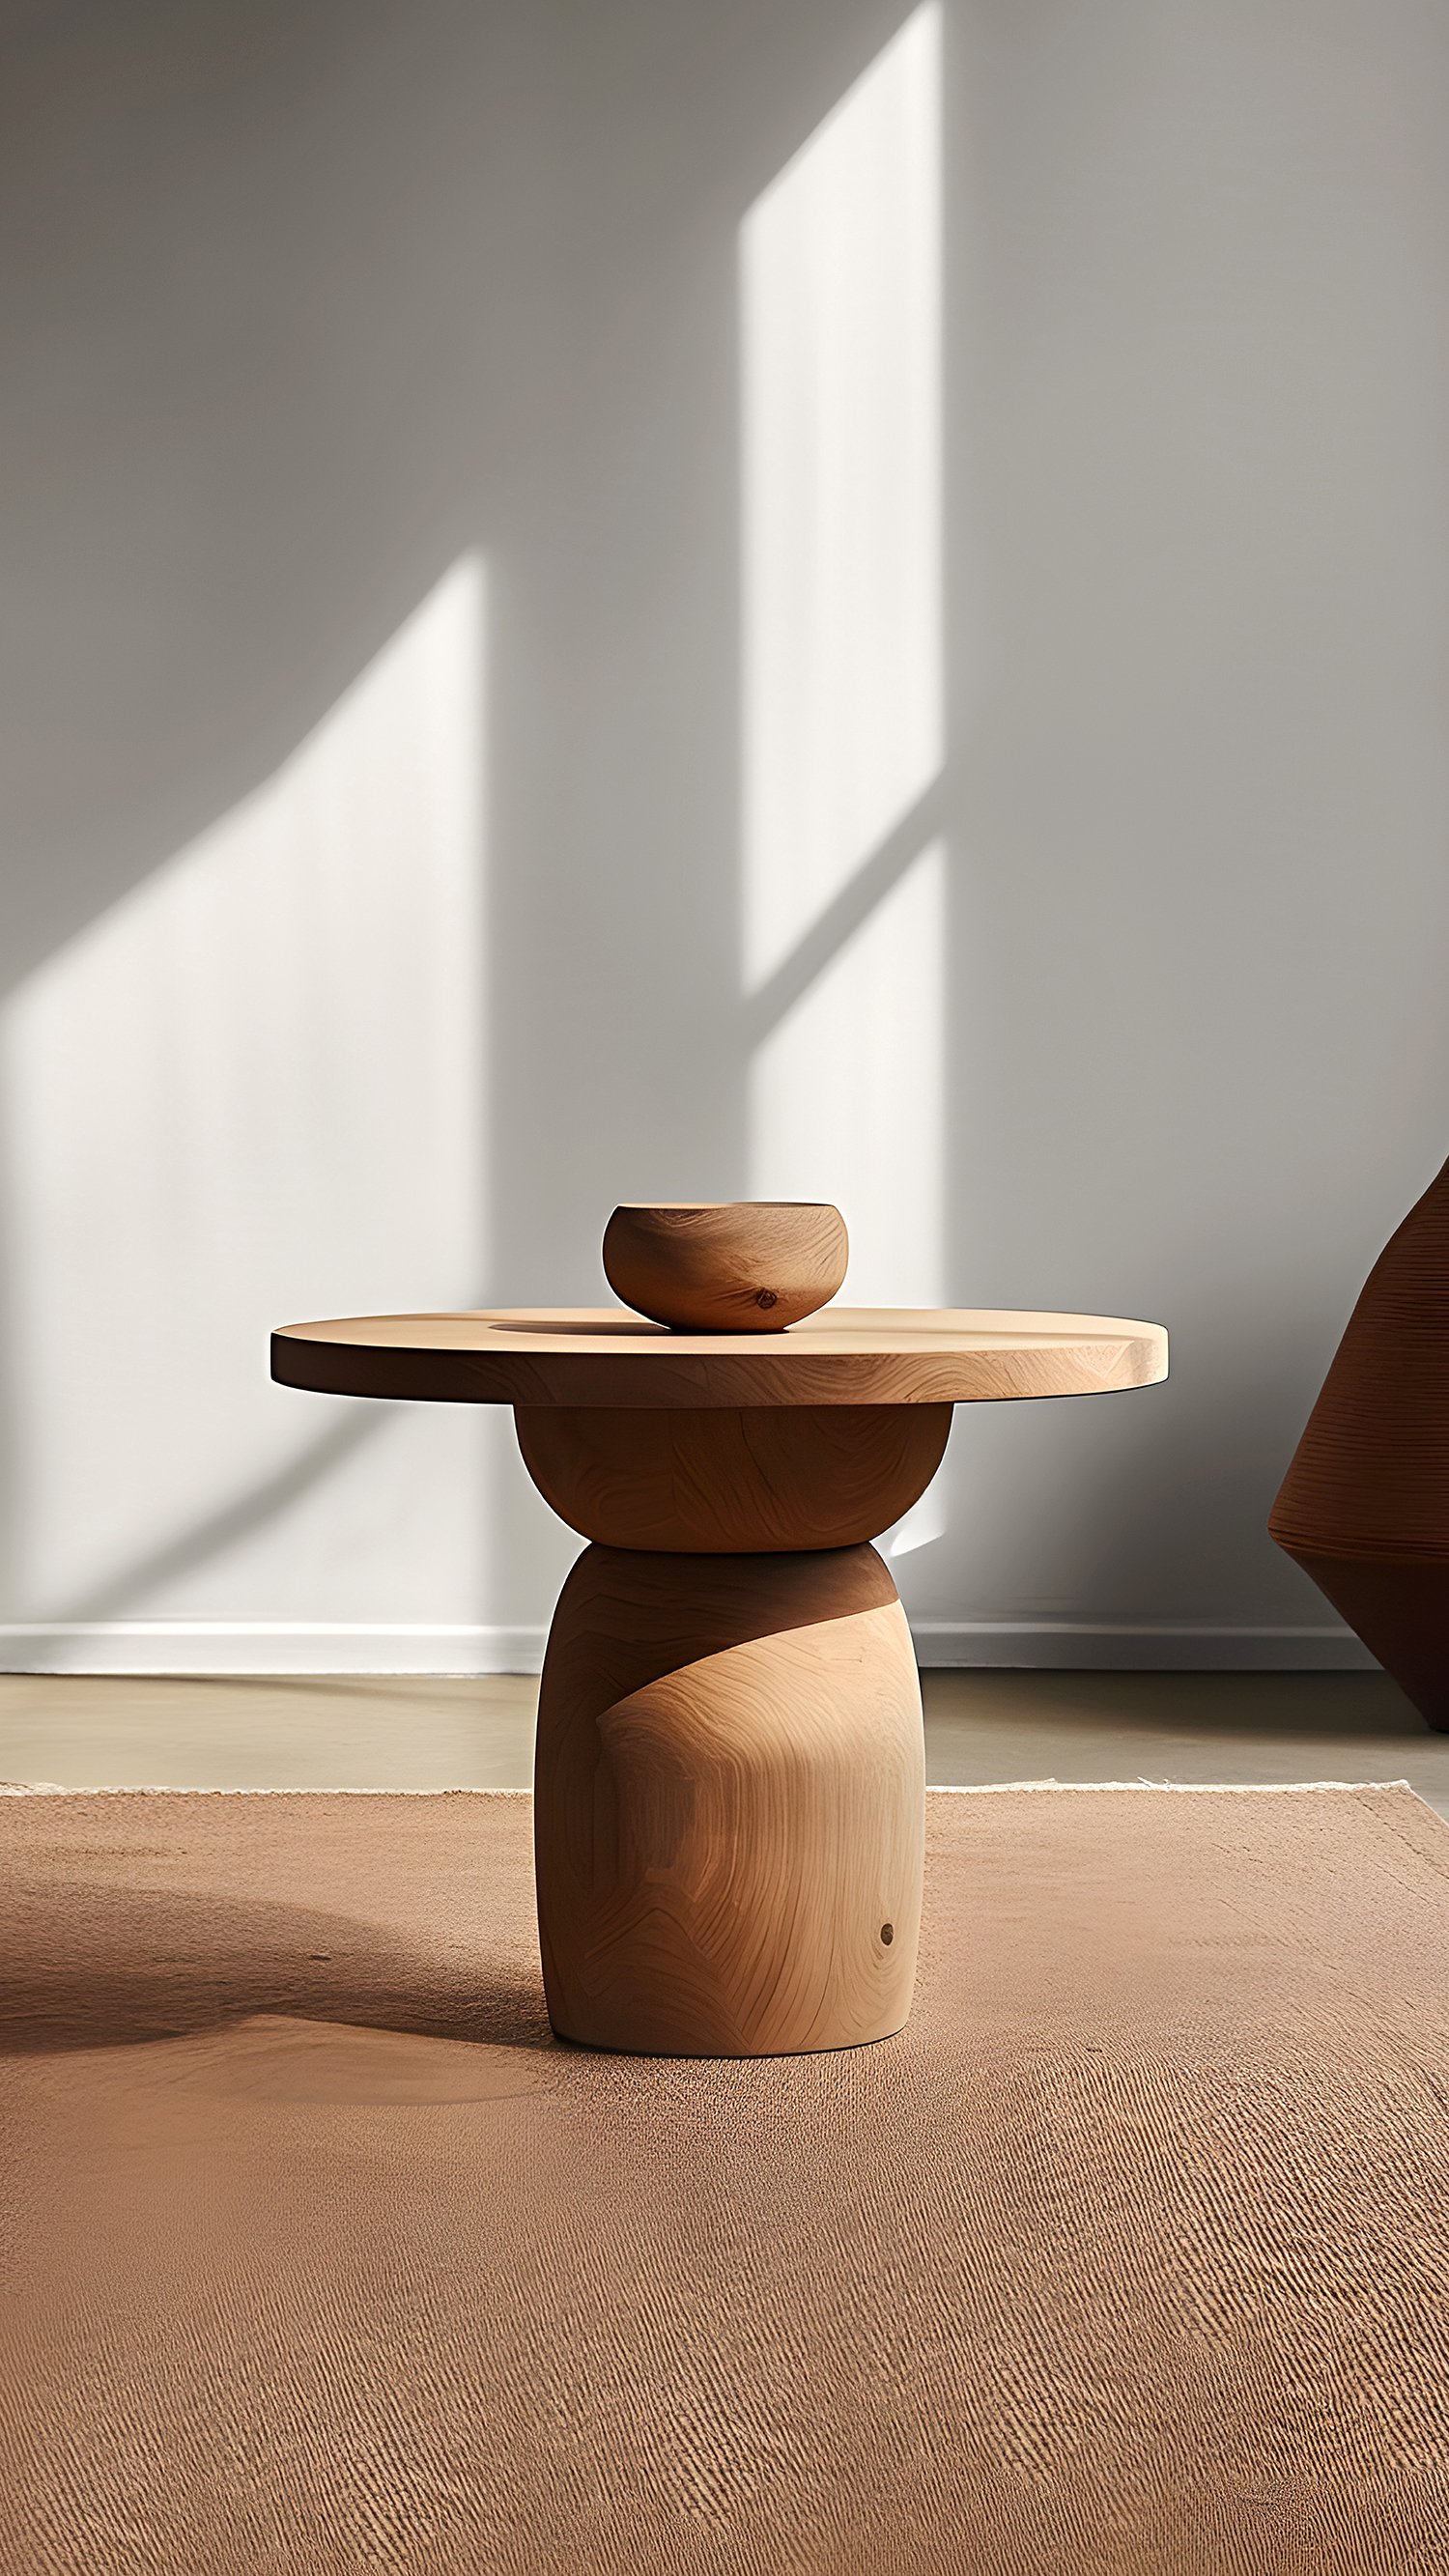 Socle 25 Side Table by Joel Escalona for NONO - 4.jpg